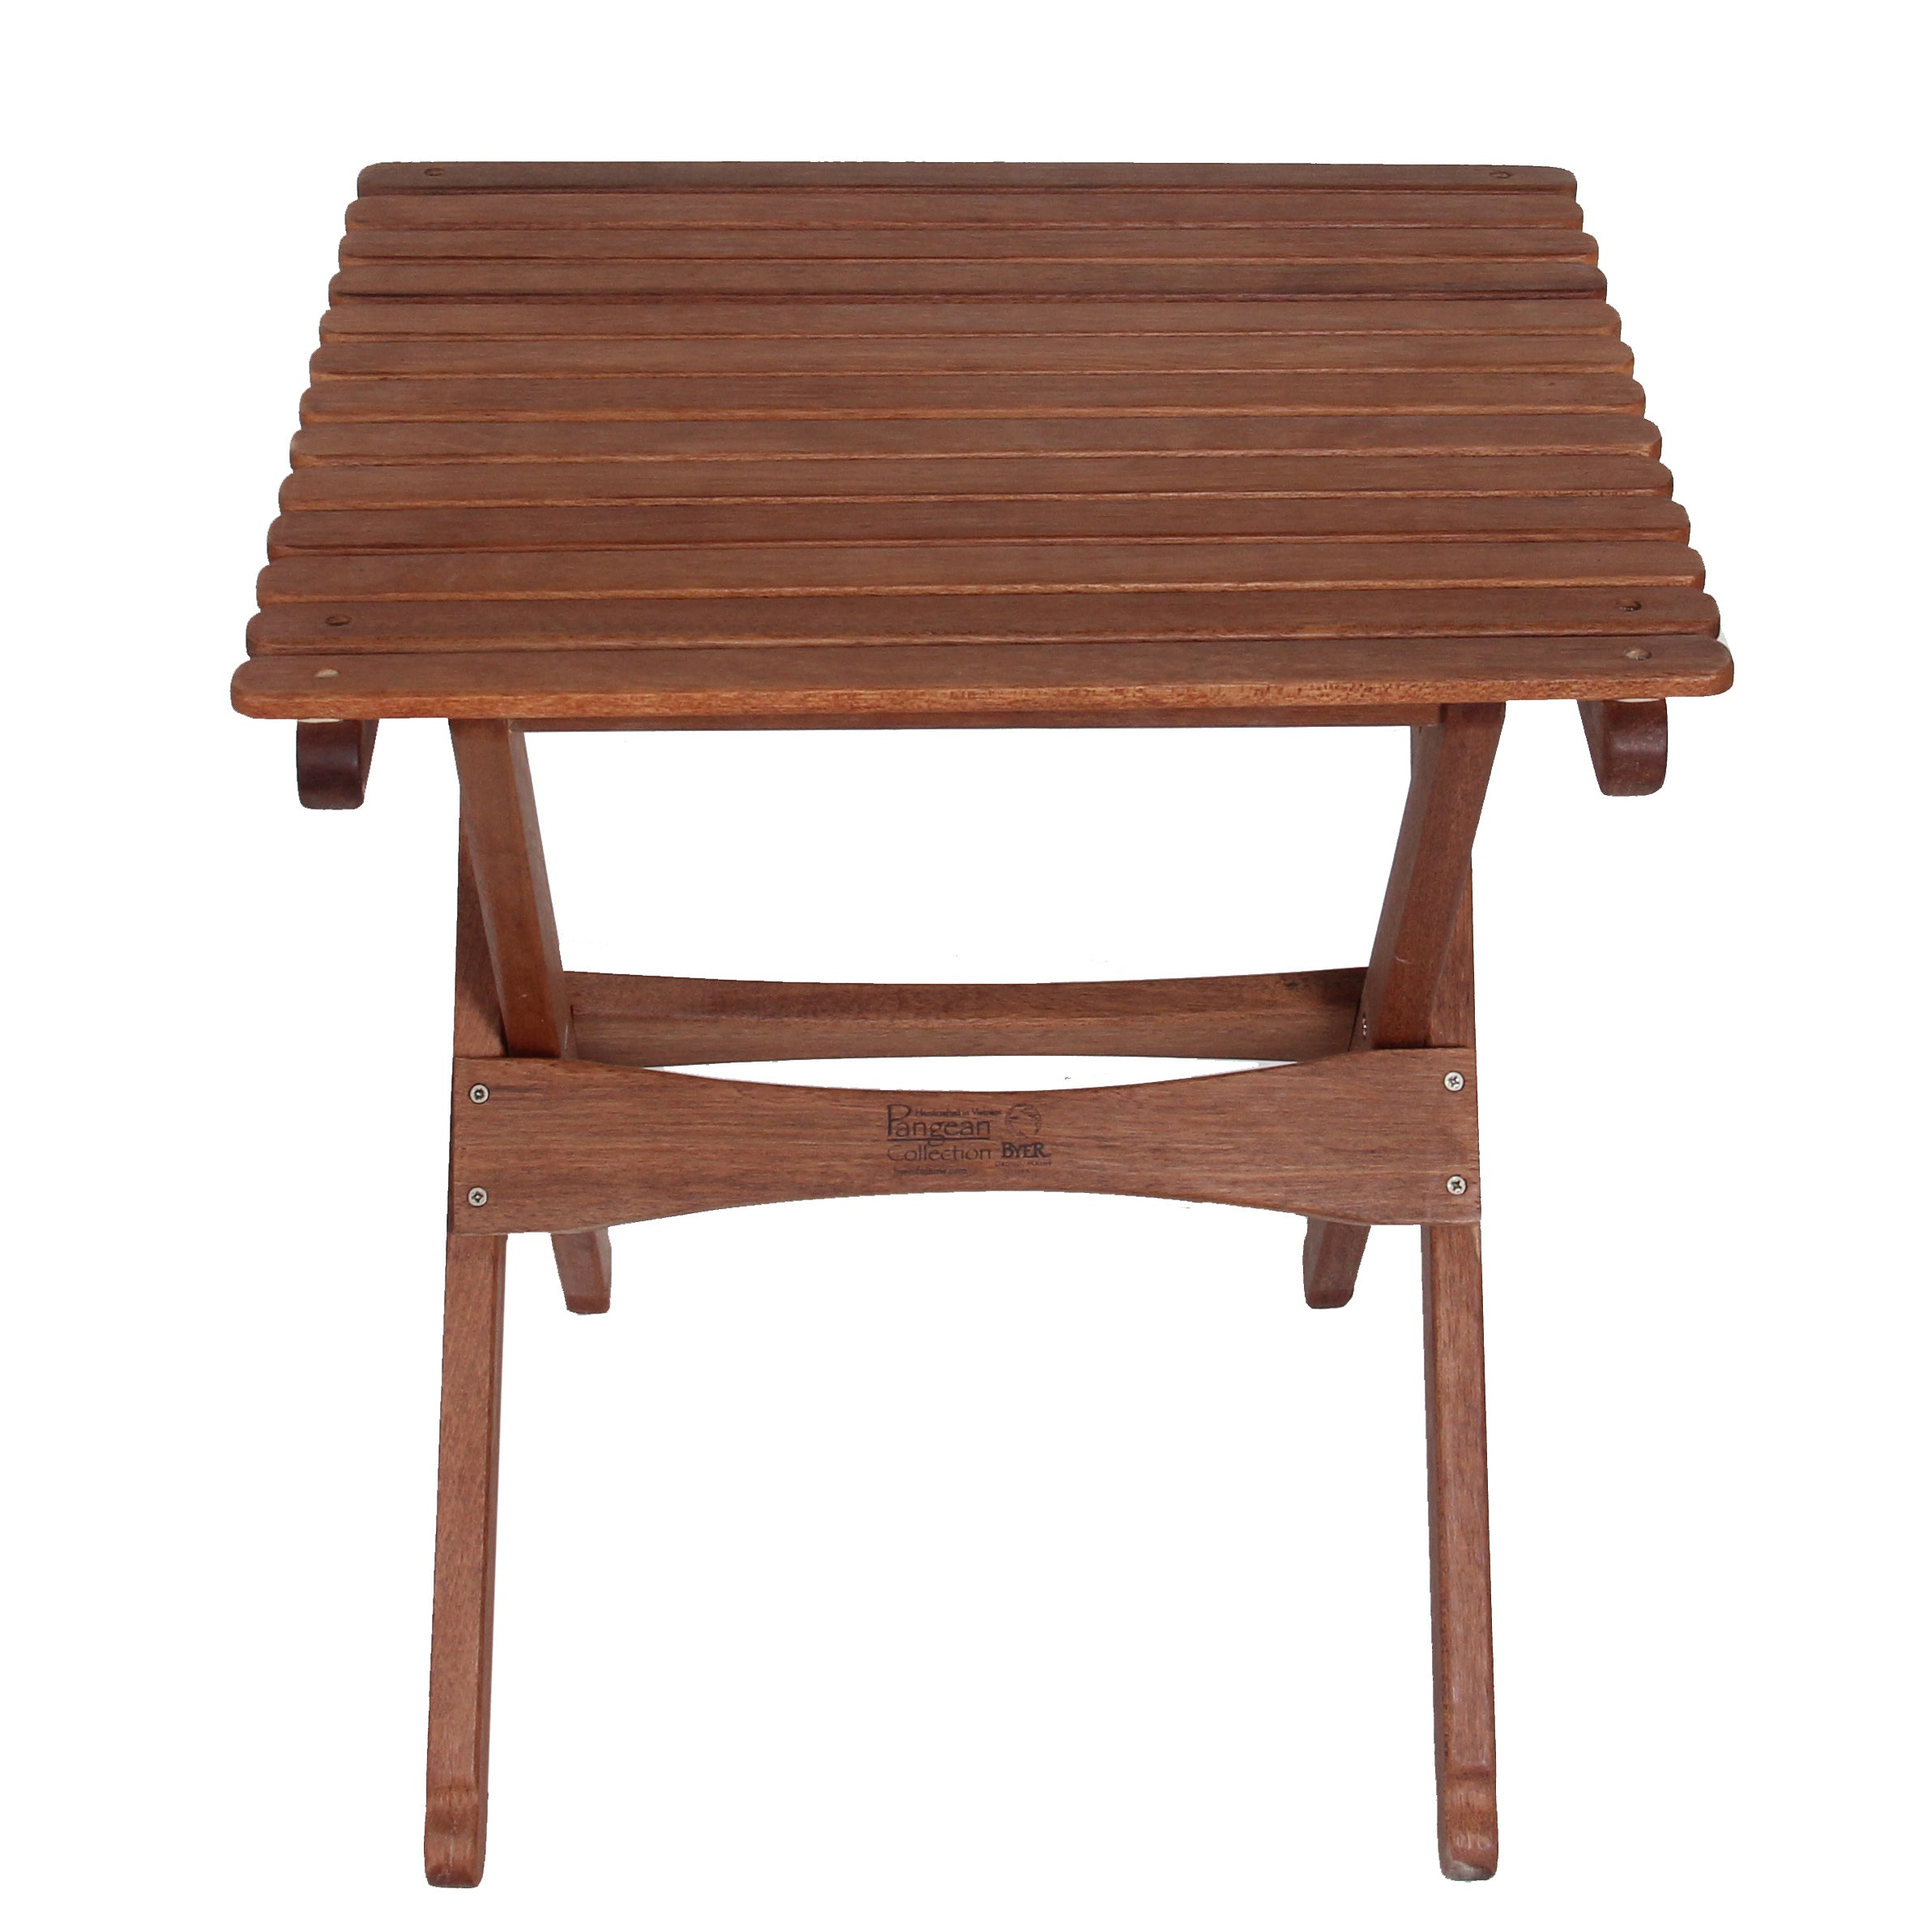 Byer Of Maine Pangean Folding Table - Large